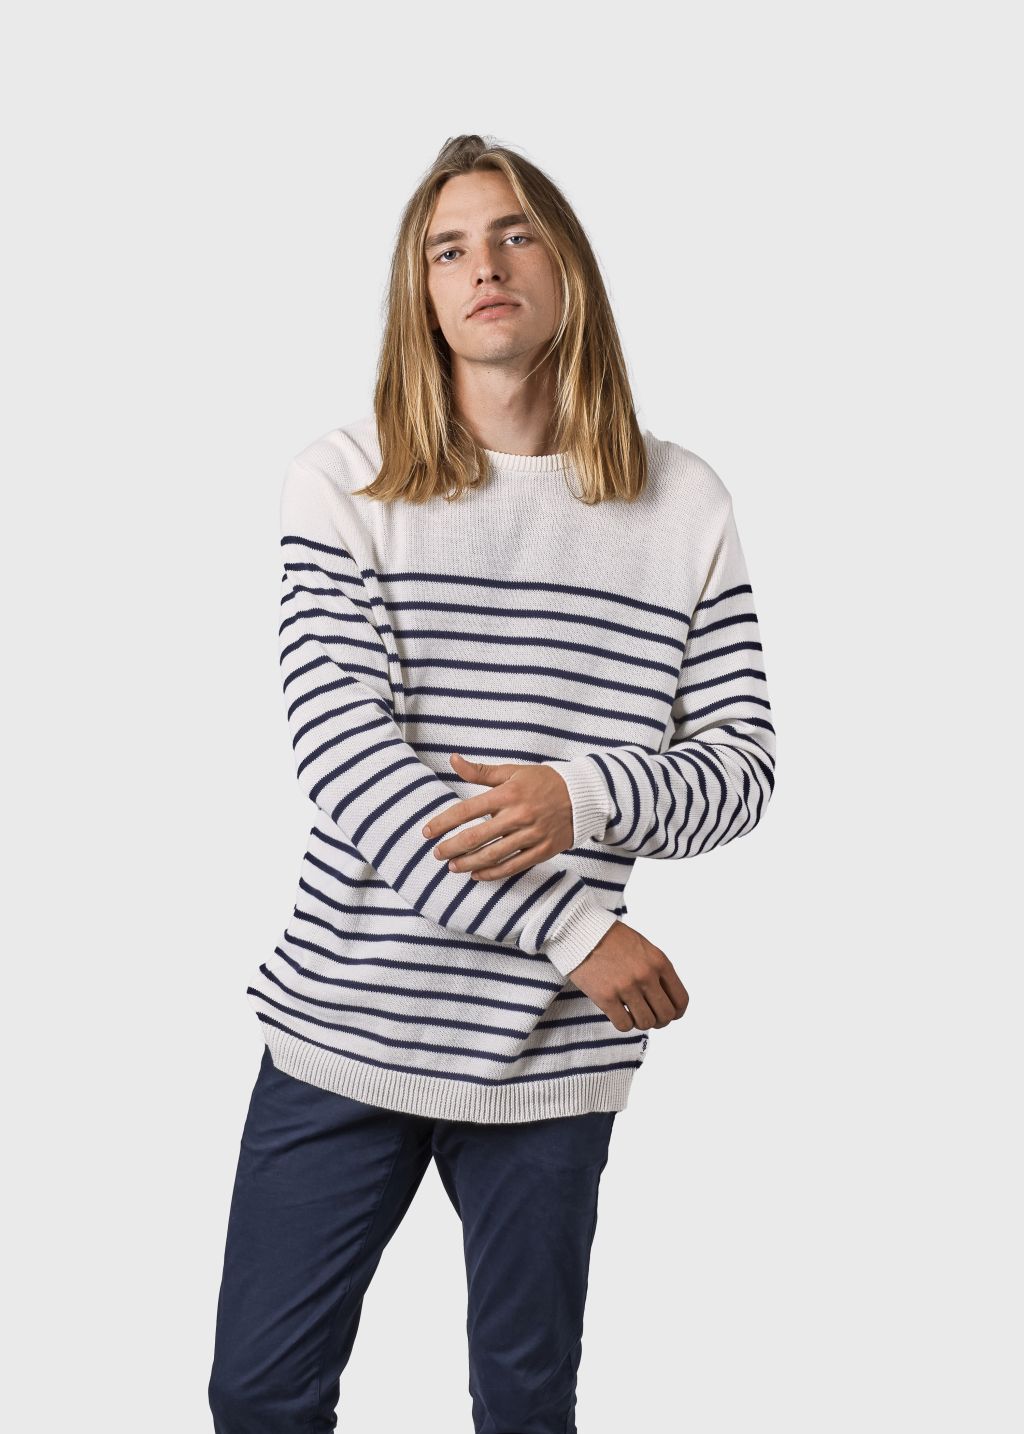 Godtfred Knit - Pullover - Cream/Navy S